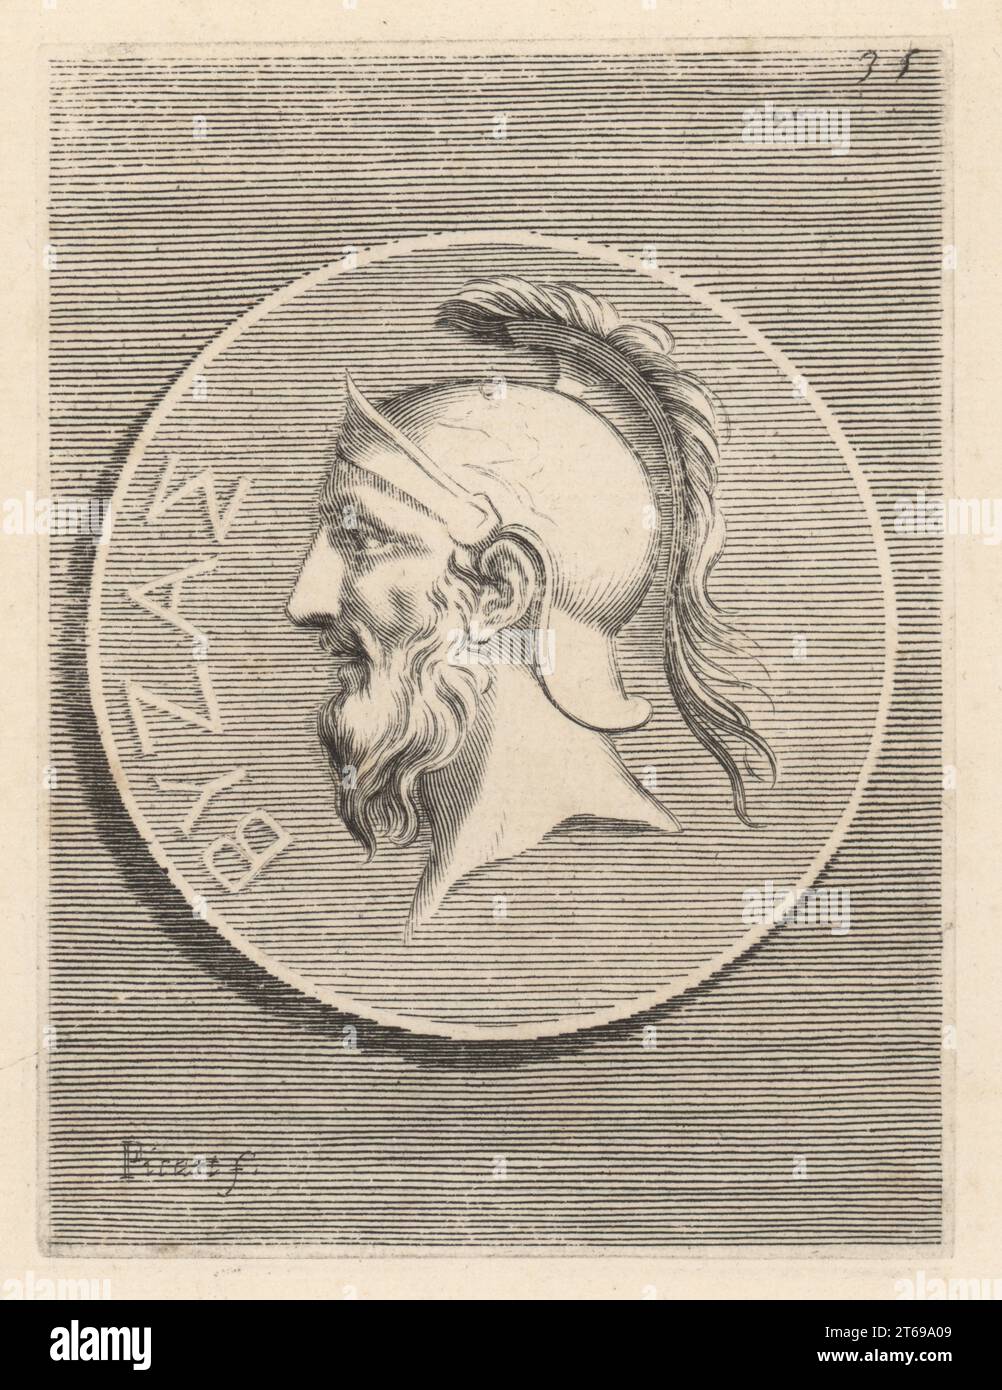 Byzas, legendary founder of Byzantium or Byzantion, the city later known as Constantinople and then Istanbul. From a bronze coin with a head of a bearded man in a crested hermet. Biza. Copperplate engraving by Etienne Picart after Giovanni Angelo Canini from Iconografia, cioe disegni d'imagini de famosissimi monarchi, regi, filososi, poeti ed oratori dell' Antichita, Drawings of images of famous monarchs, kings, philosophers, poets and orators of Antiquity, Ignatio deLazari, Rome, 1699. Stock Photo